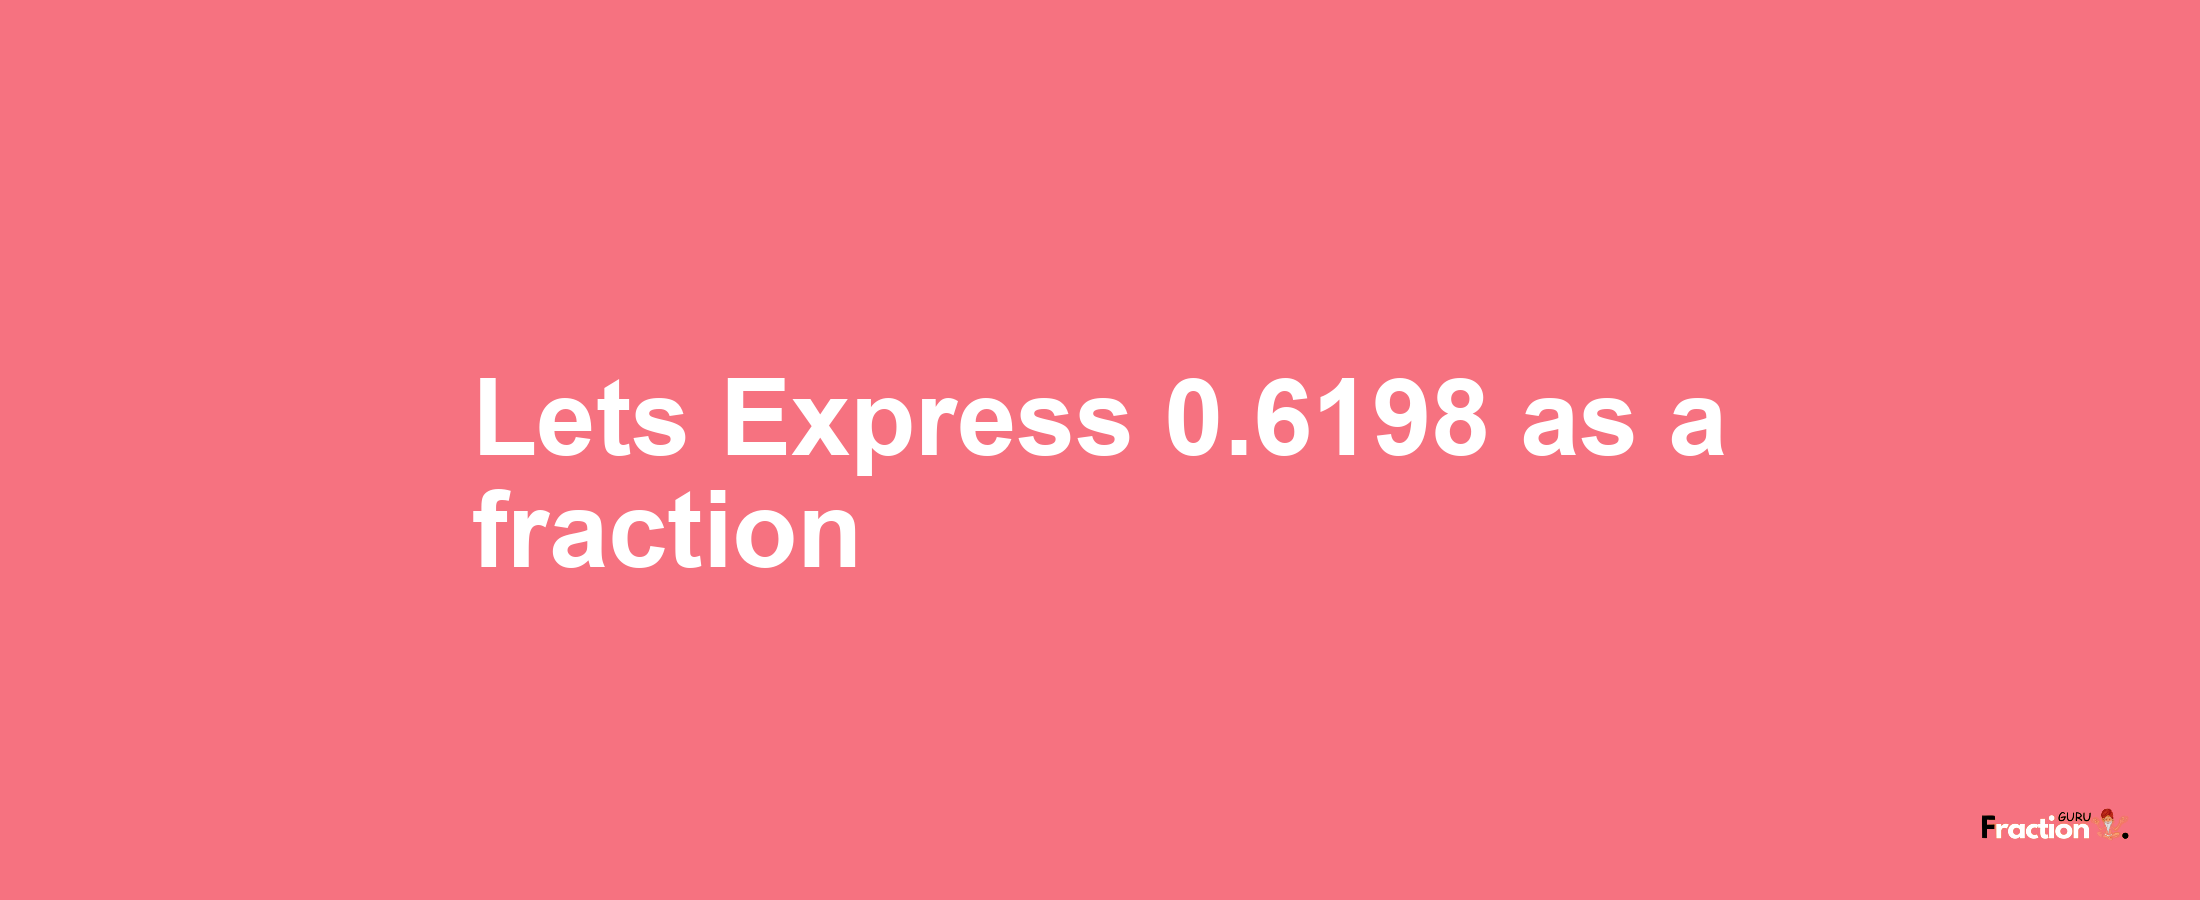 Lets Express 0.6198 as afraction